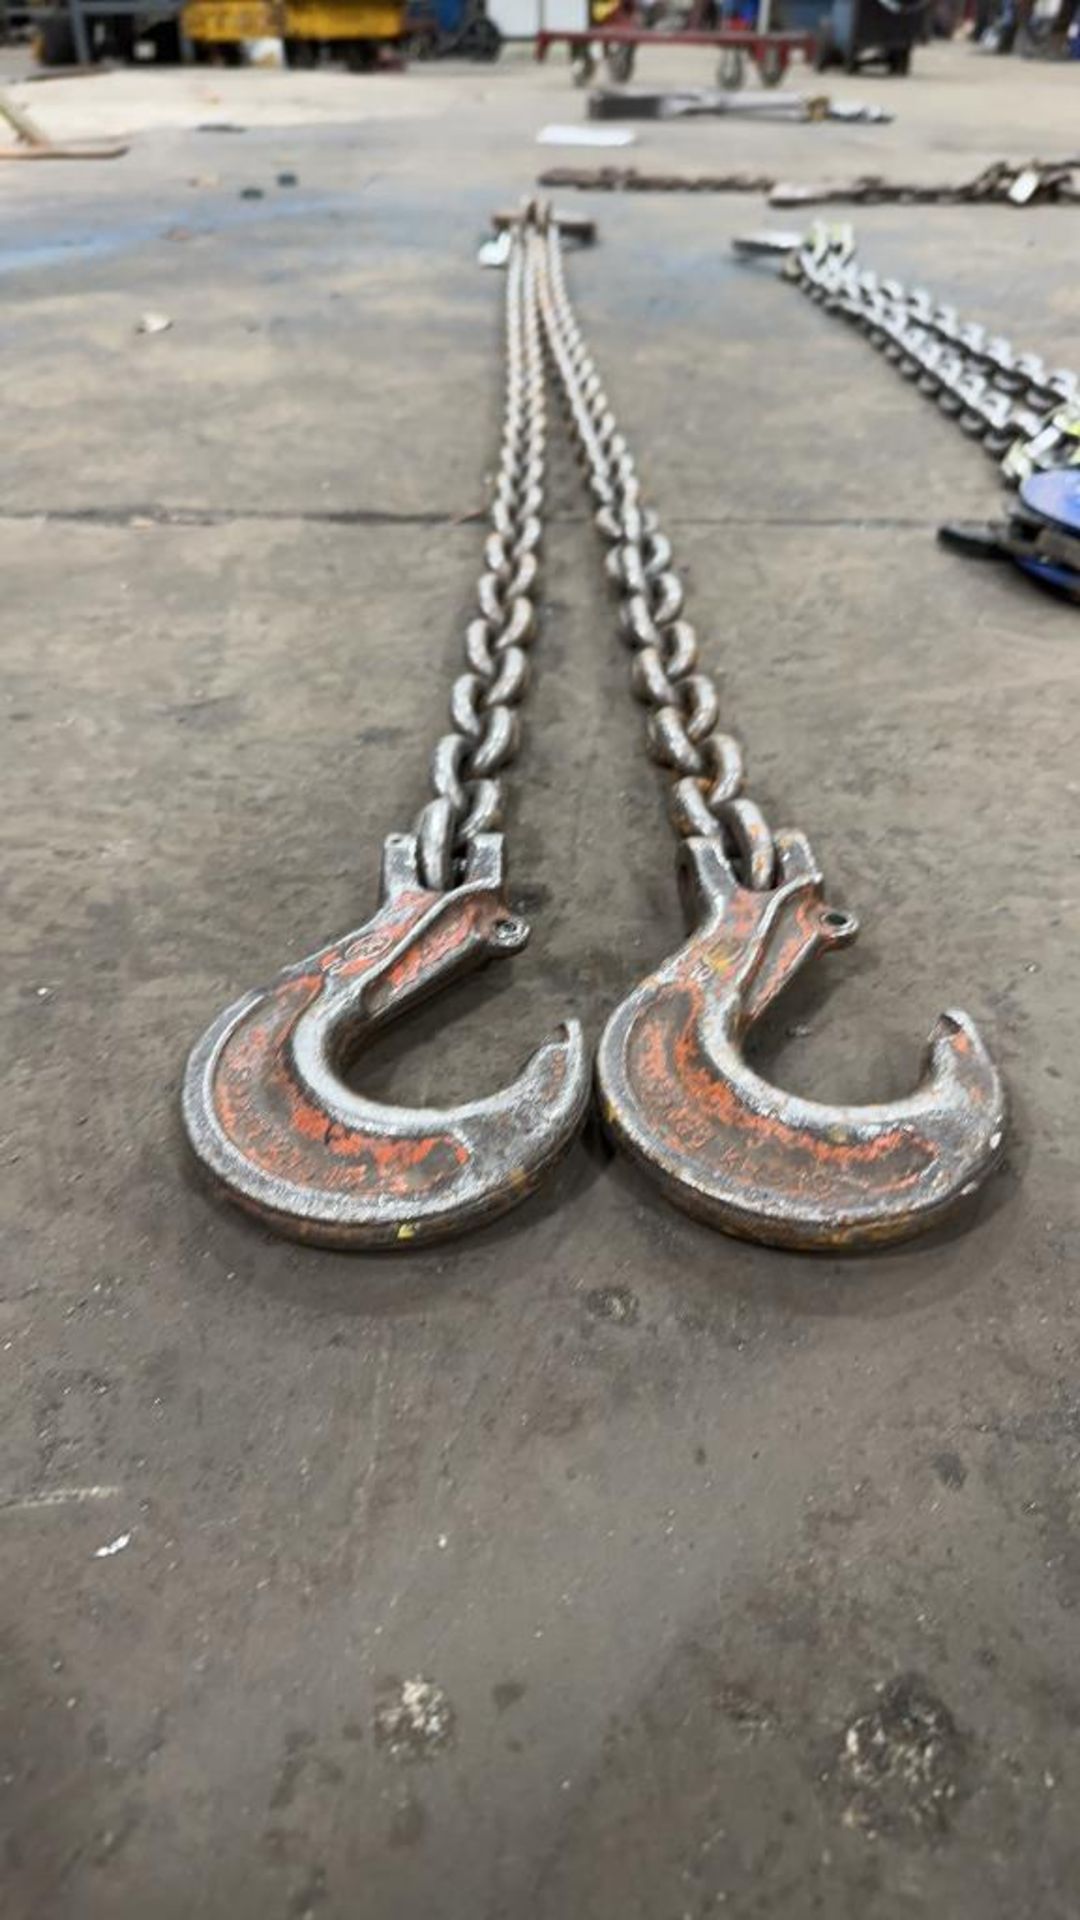 6ft Chains on Rigging Ring with Hoist Hooks - Image 2 of 4